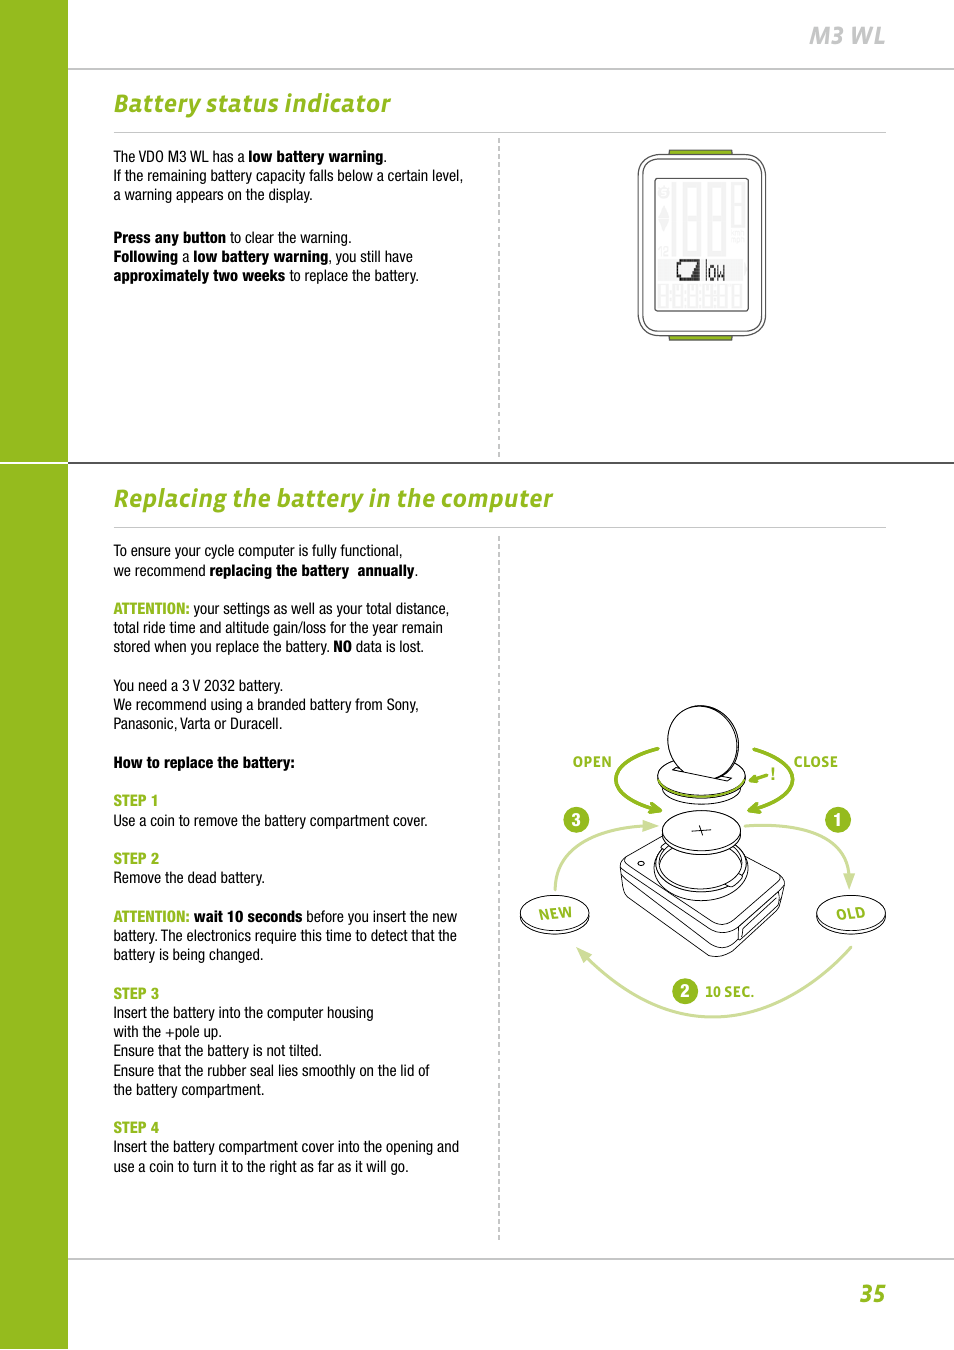 35 m3 wl, Replacing the battery in the computer, Battery status indicator | VDO M3WL User Manual | Page 35 / 41